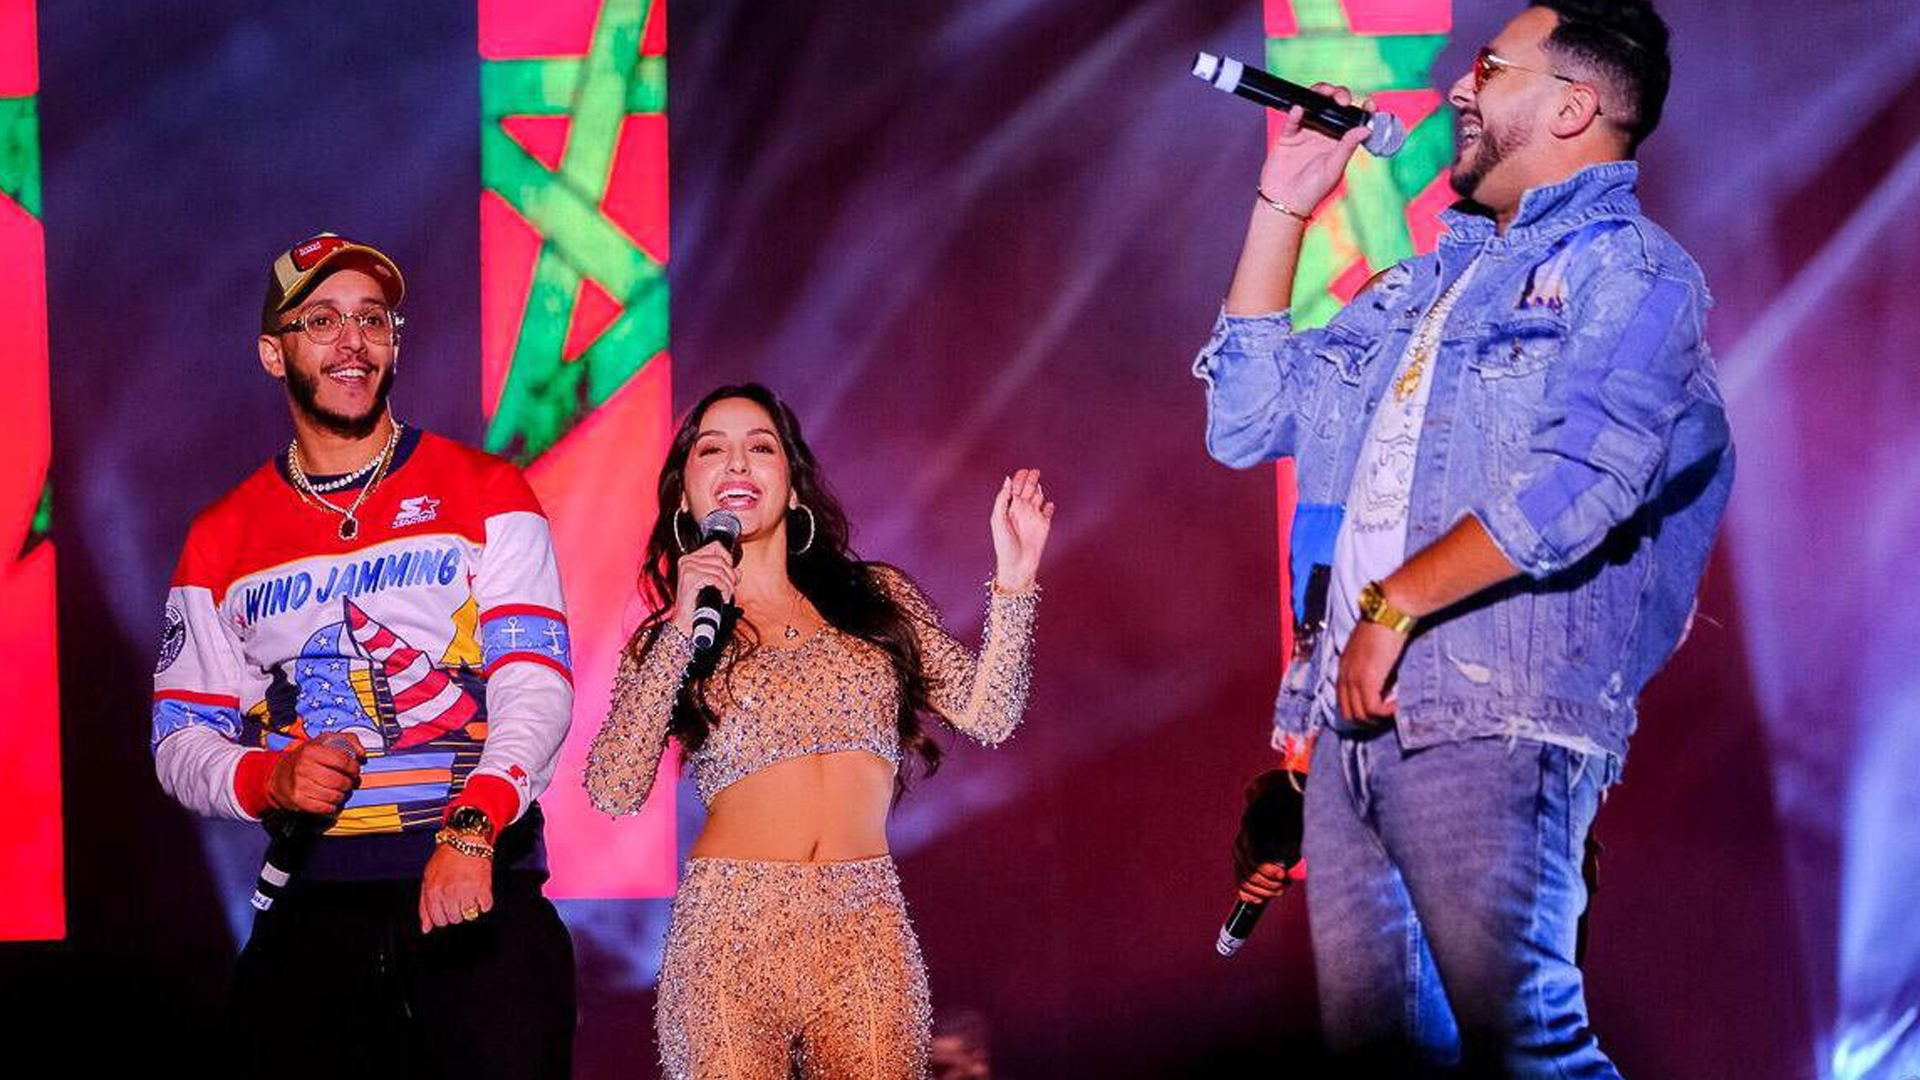 Nora Fatehi sets the stage on fire with her singing